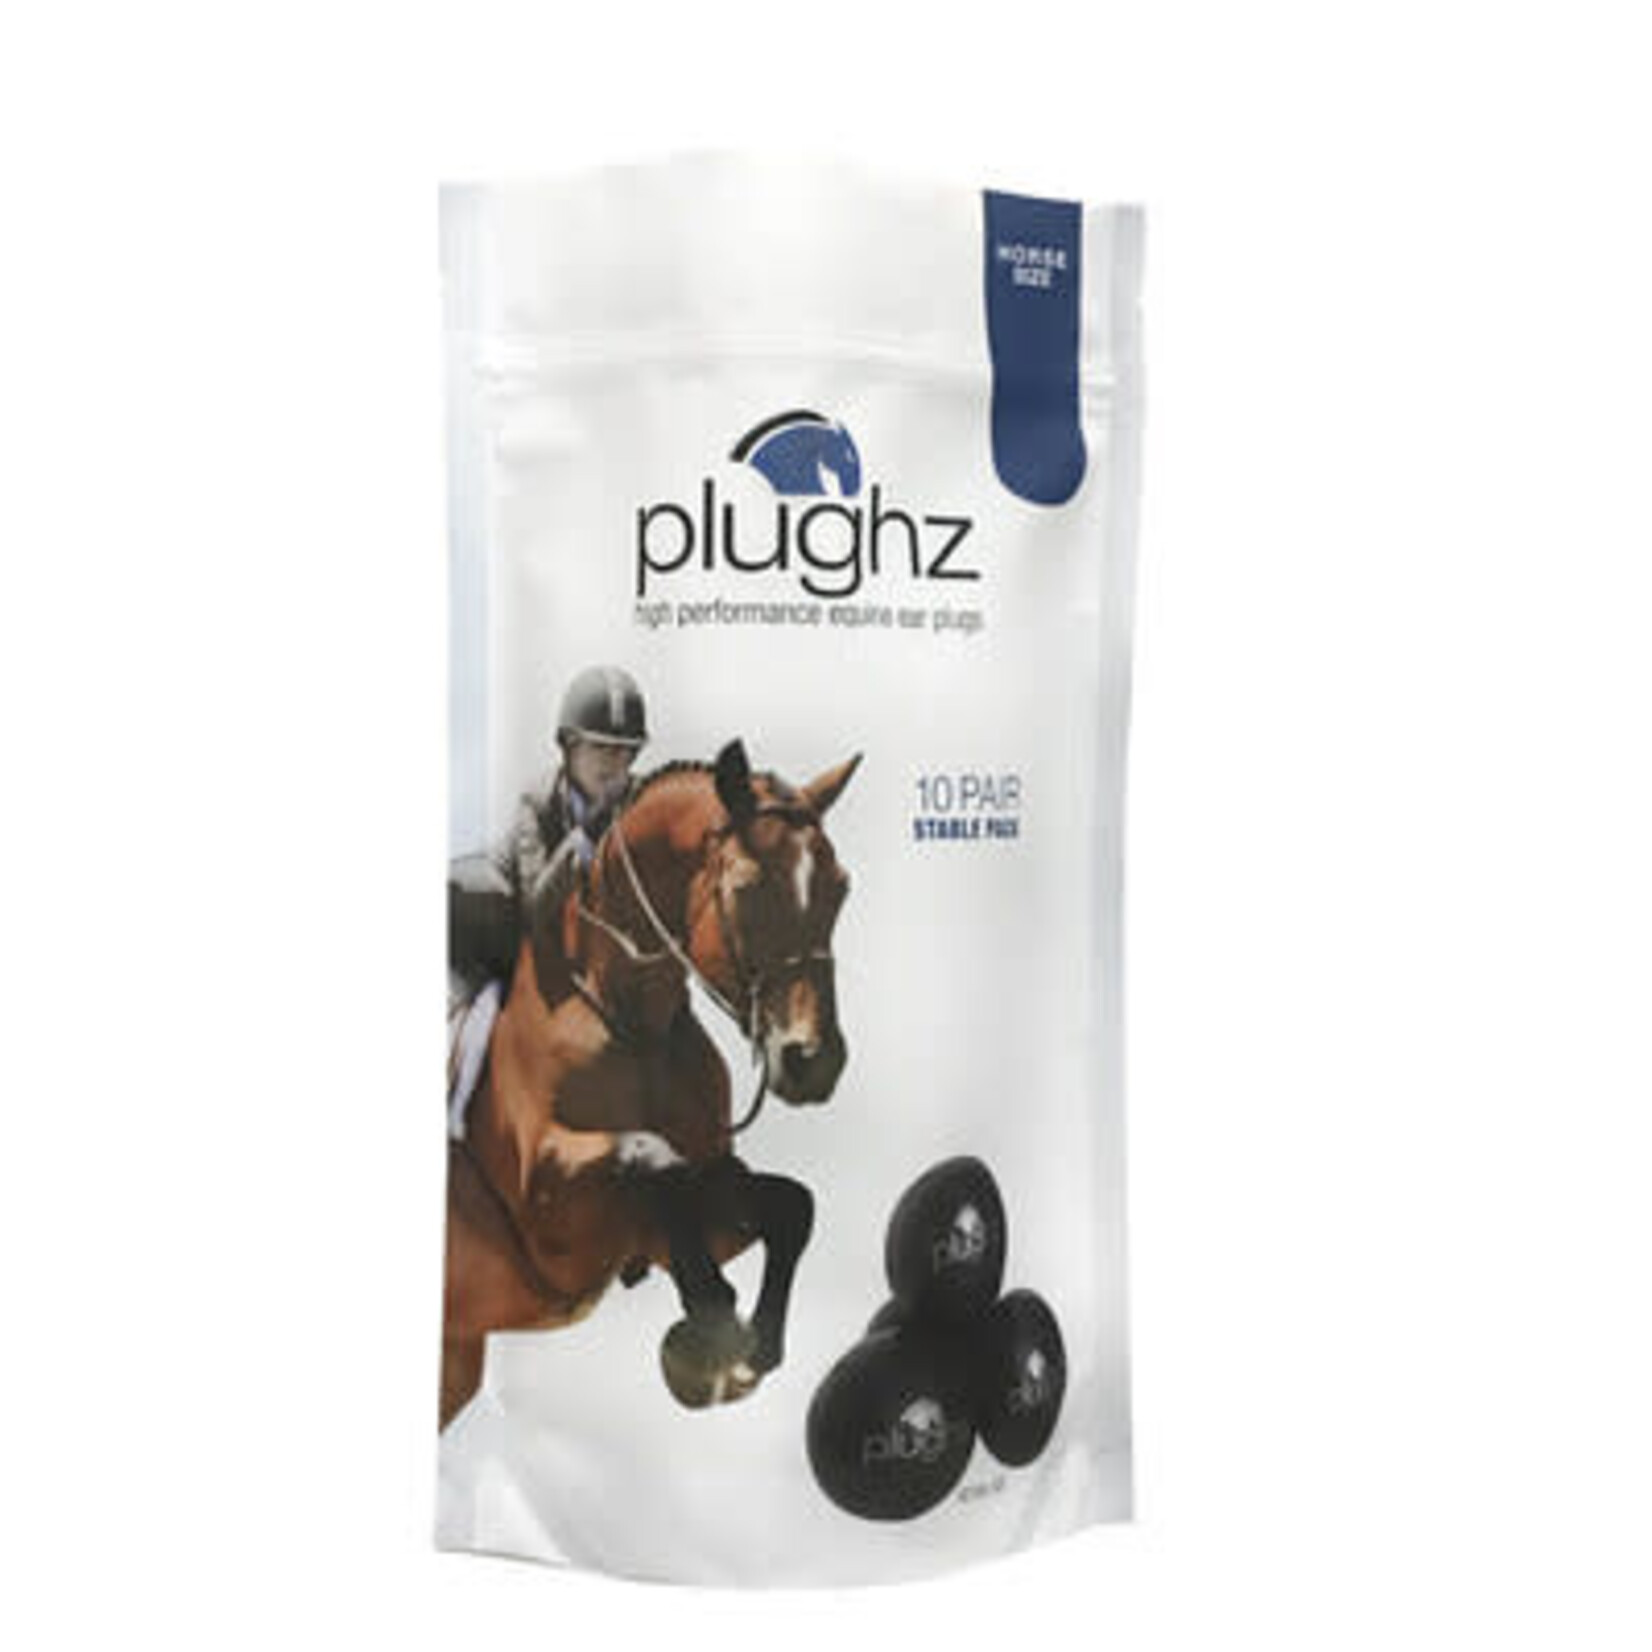 Plughz Plughz Stable Pack, 10 Pairs